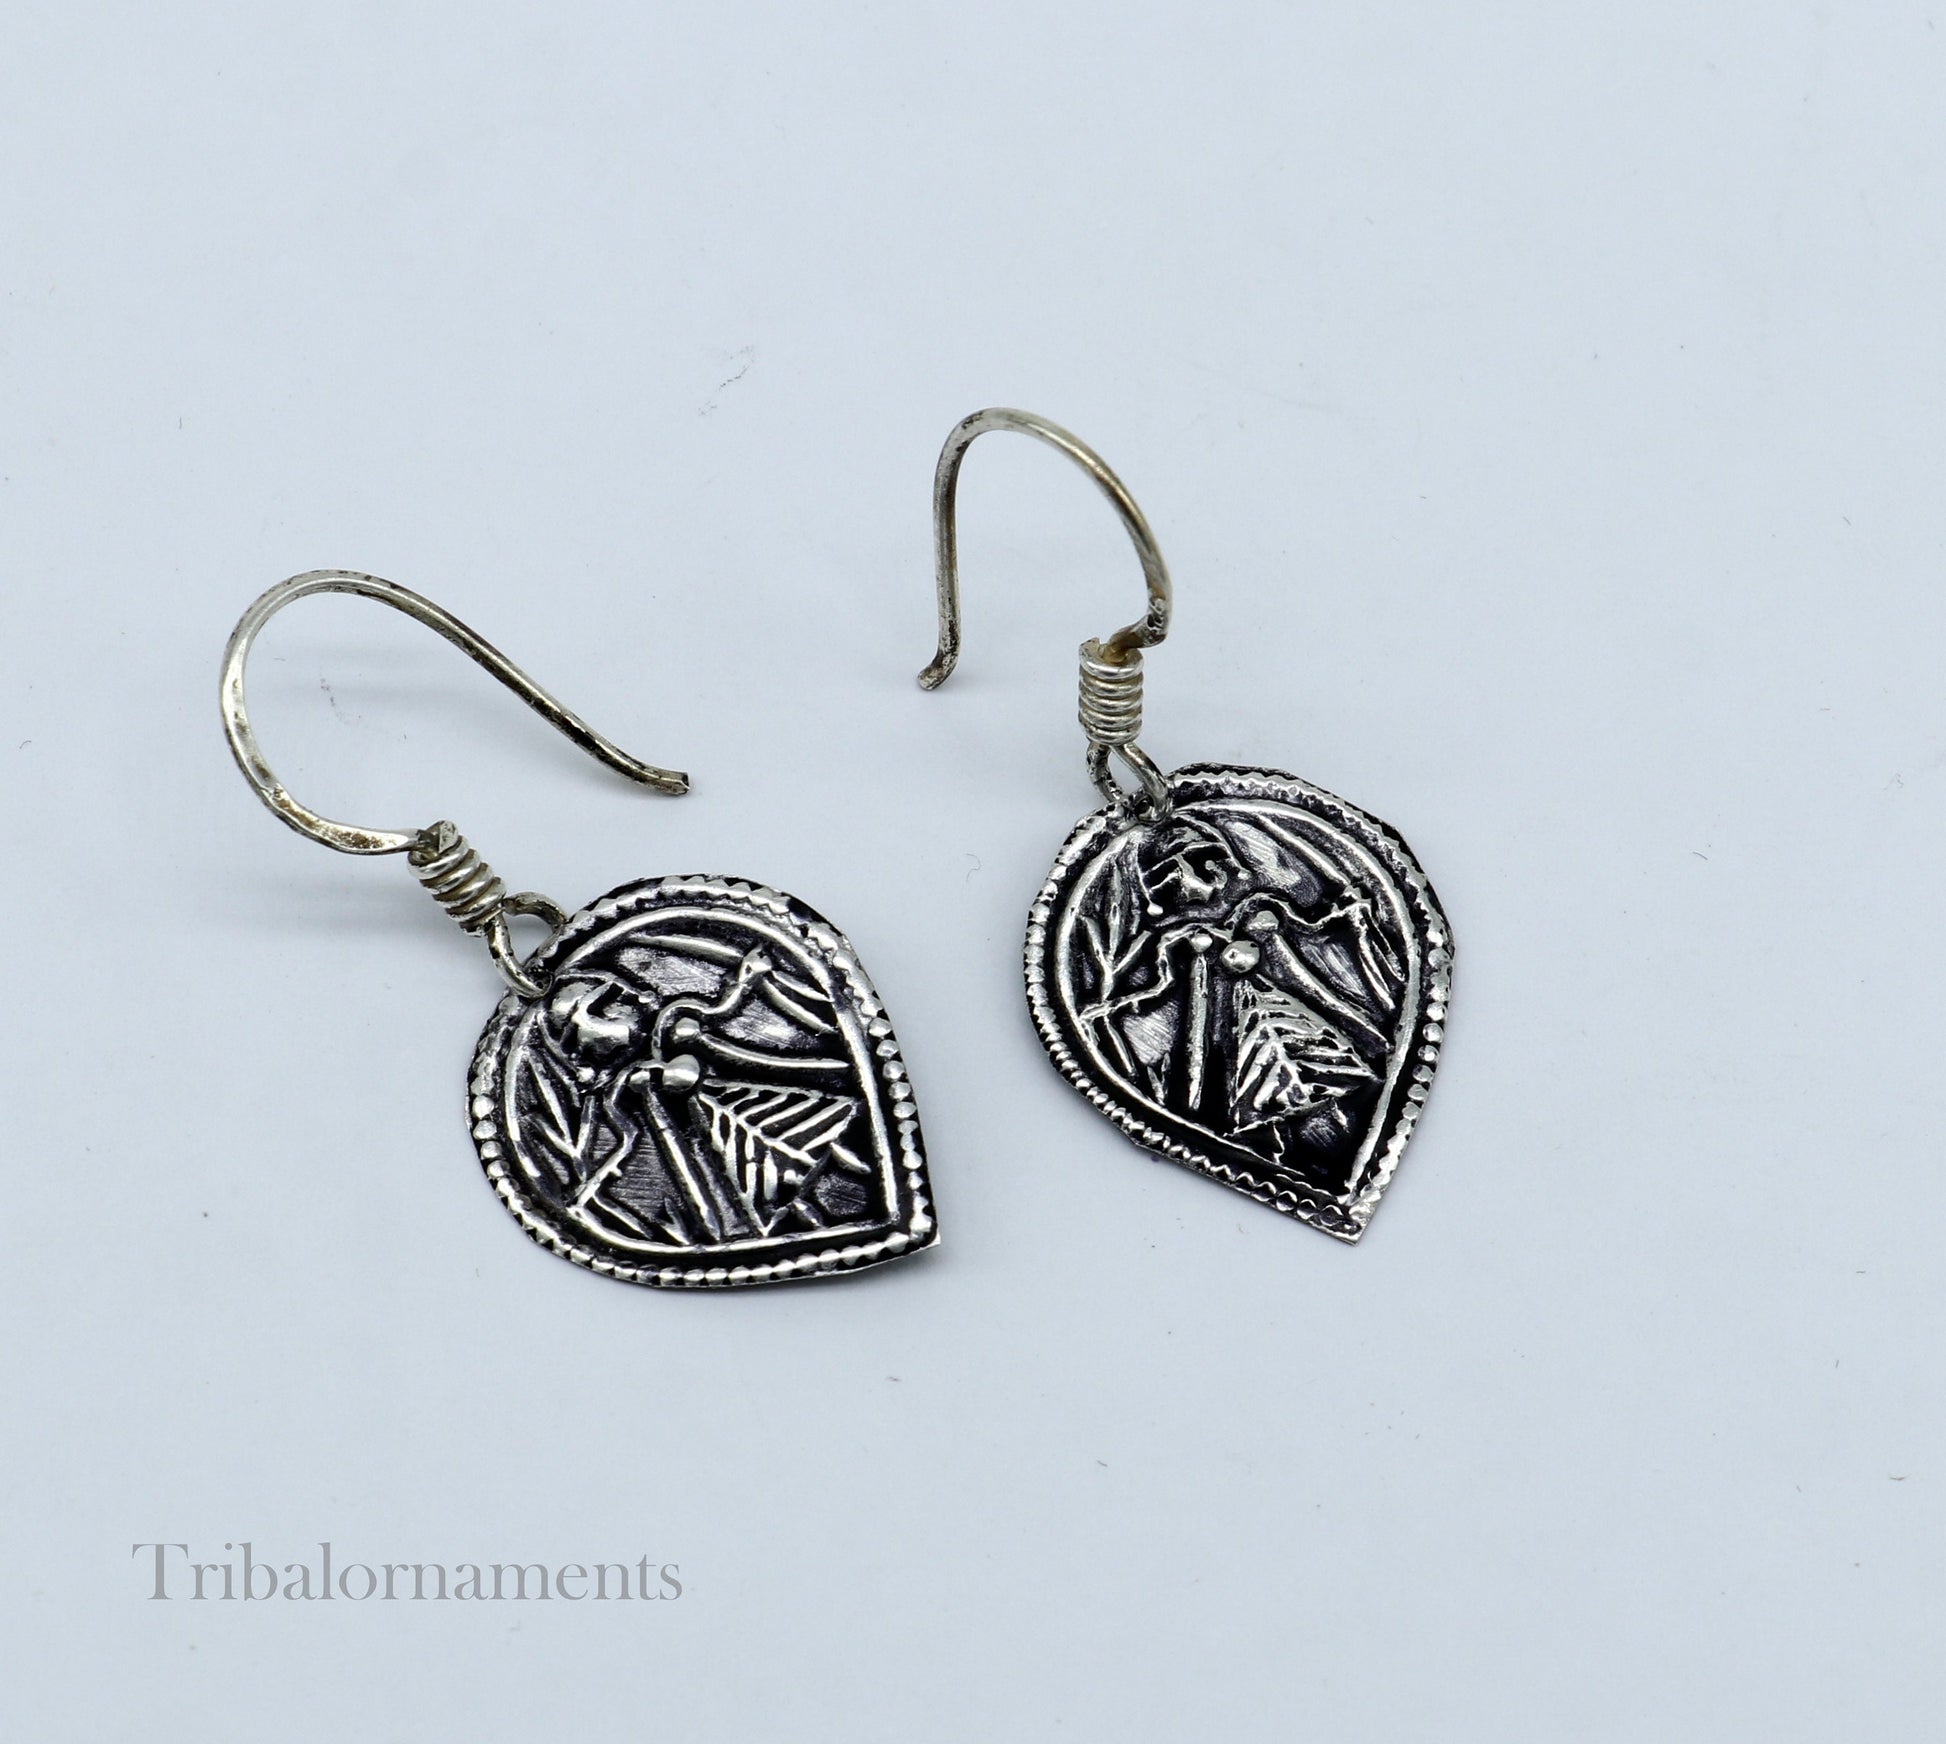 Vintage style 925 sterling silver excellent customized traditional indian style hoops earring, amazing tribal ethnic earring ear957 - TRIBAL ORNAMENTS